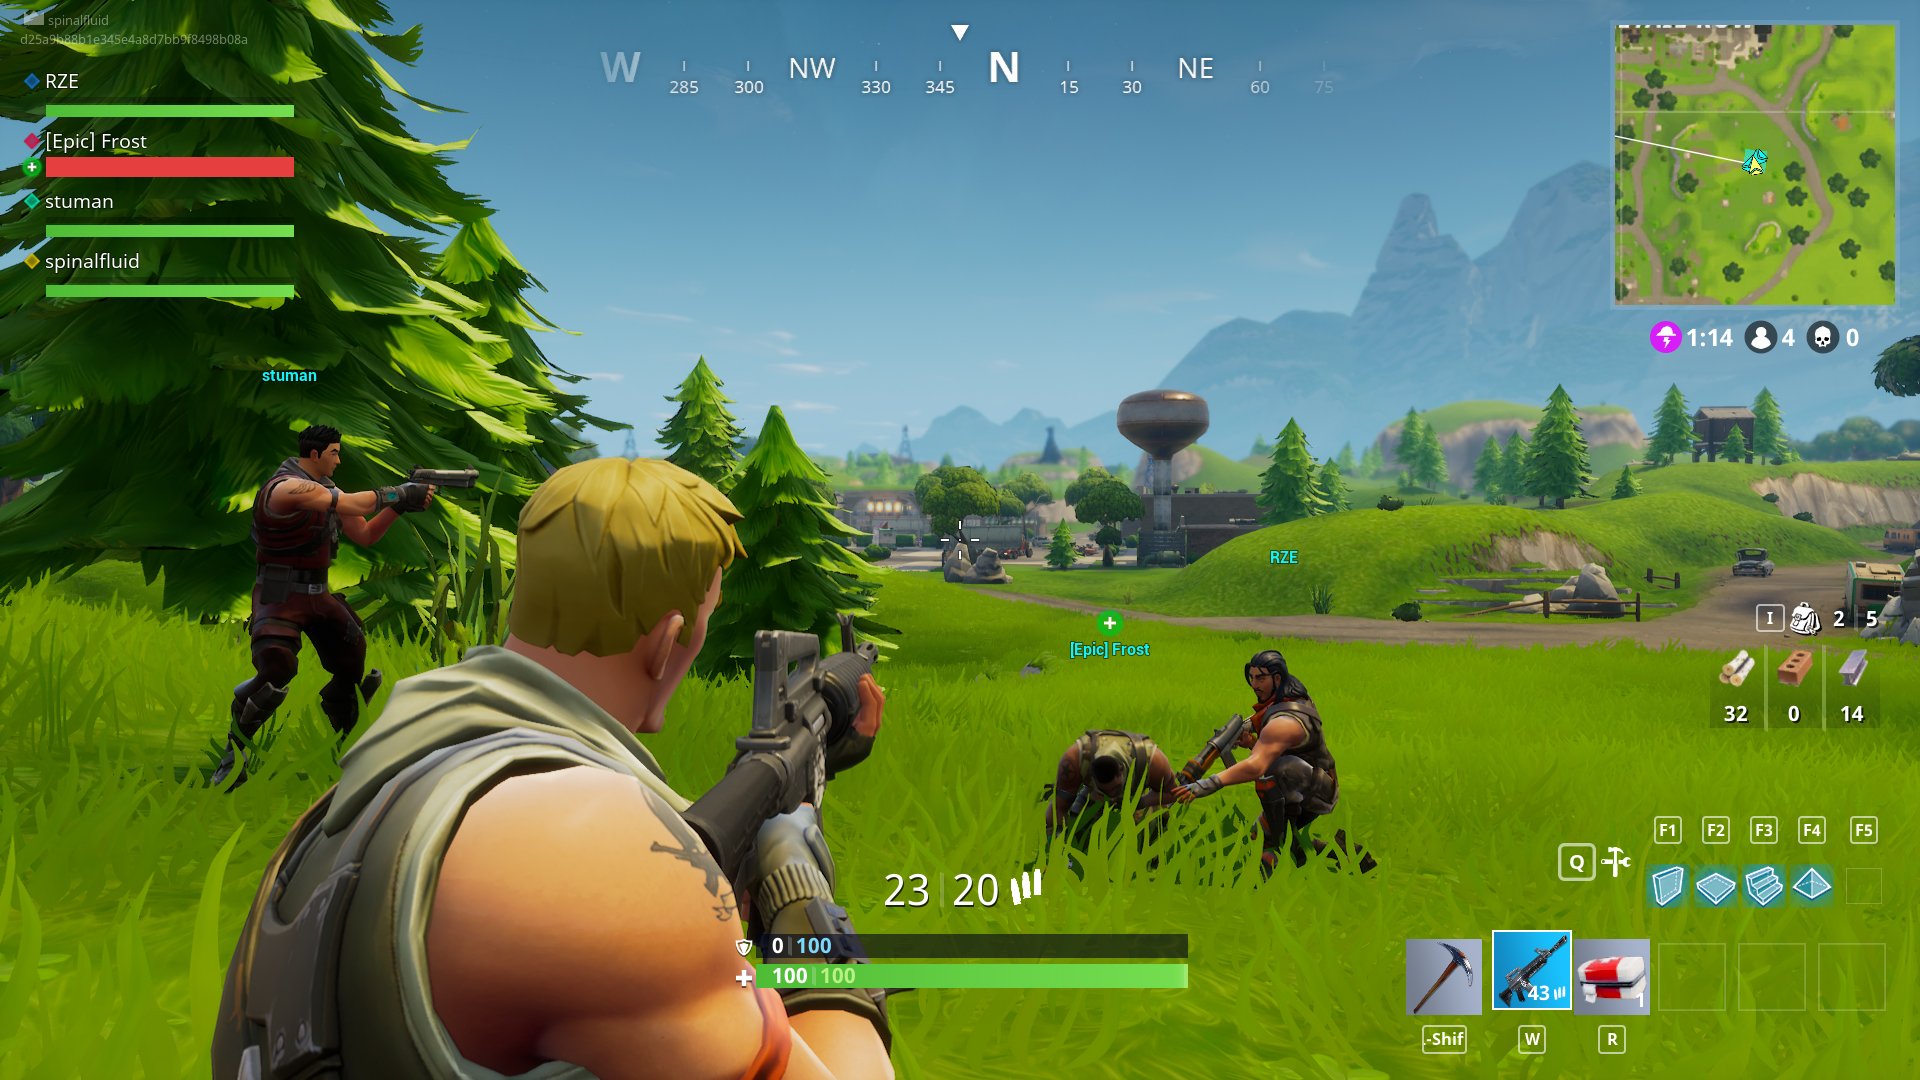 but before you go dumping the rest of your bullets into the downed enemy take time to clear your surroundings and make sure their friends aren t right - xbox one s fortnite hacks